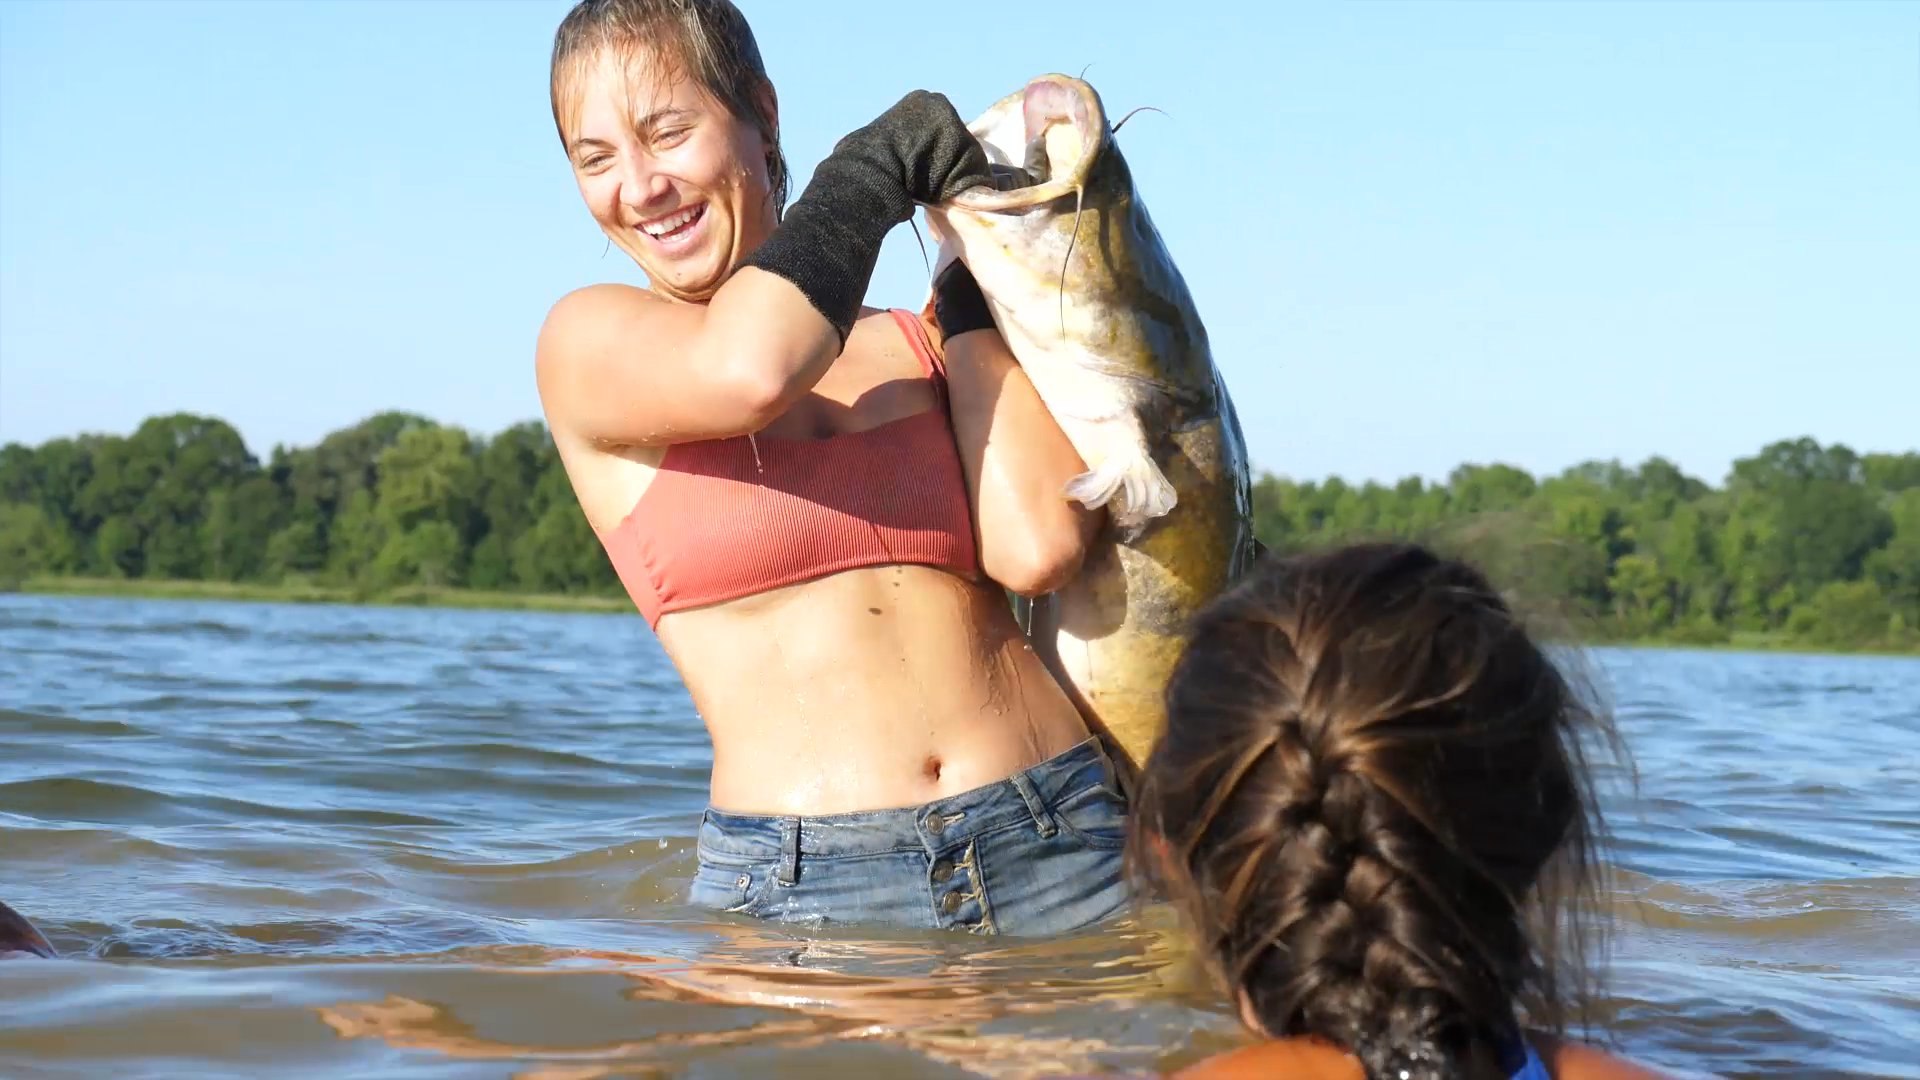 Grabbing Catfish Out of the Water with My Bare Hands! - video